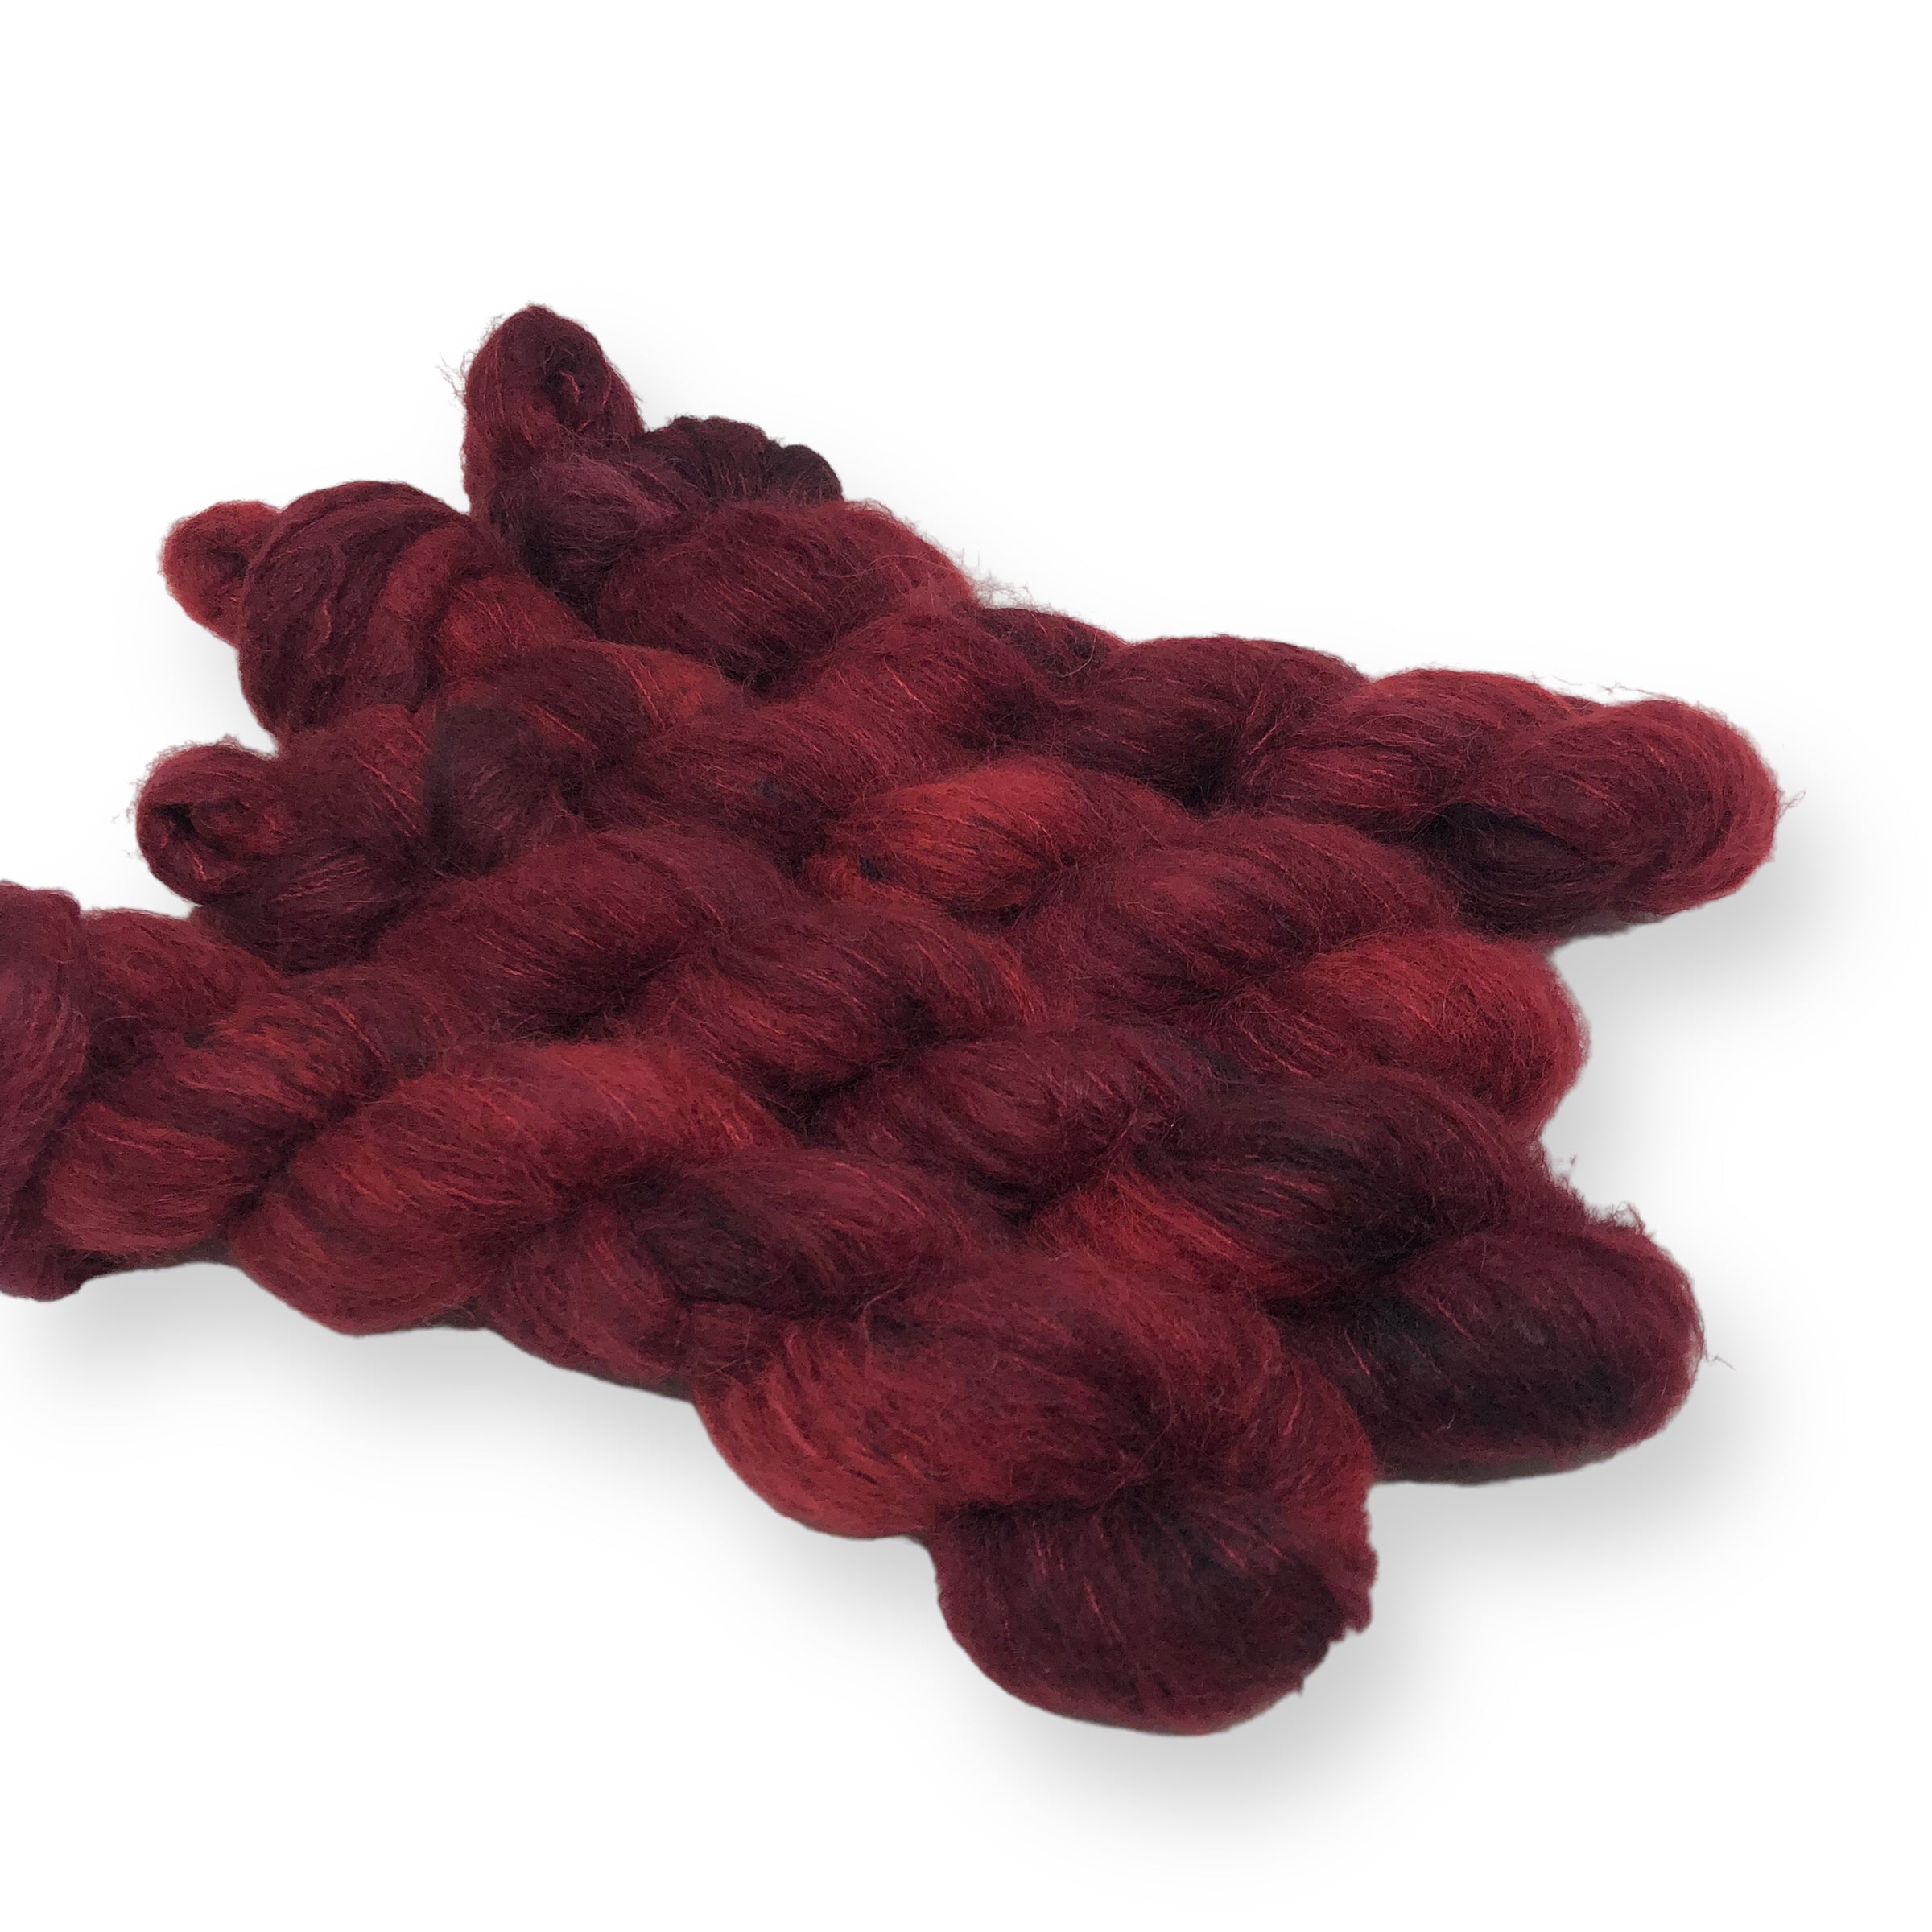 Cherry Cordial - Halo Silk Laceweight